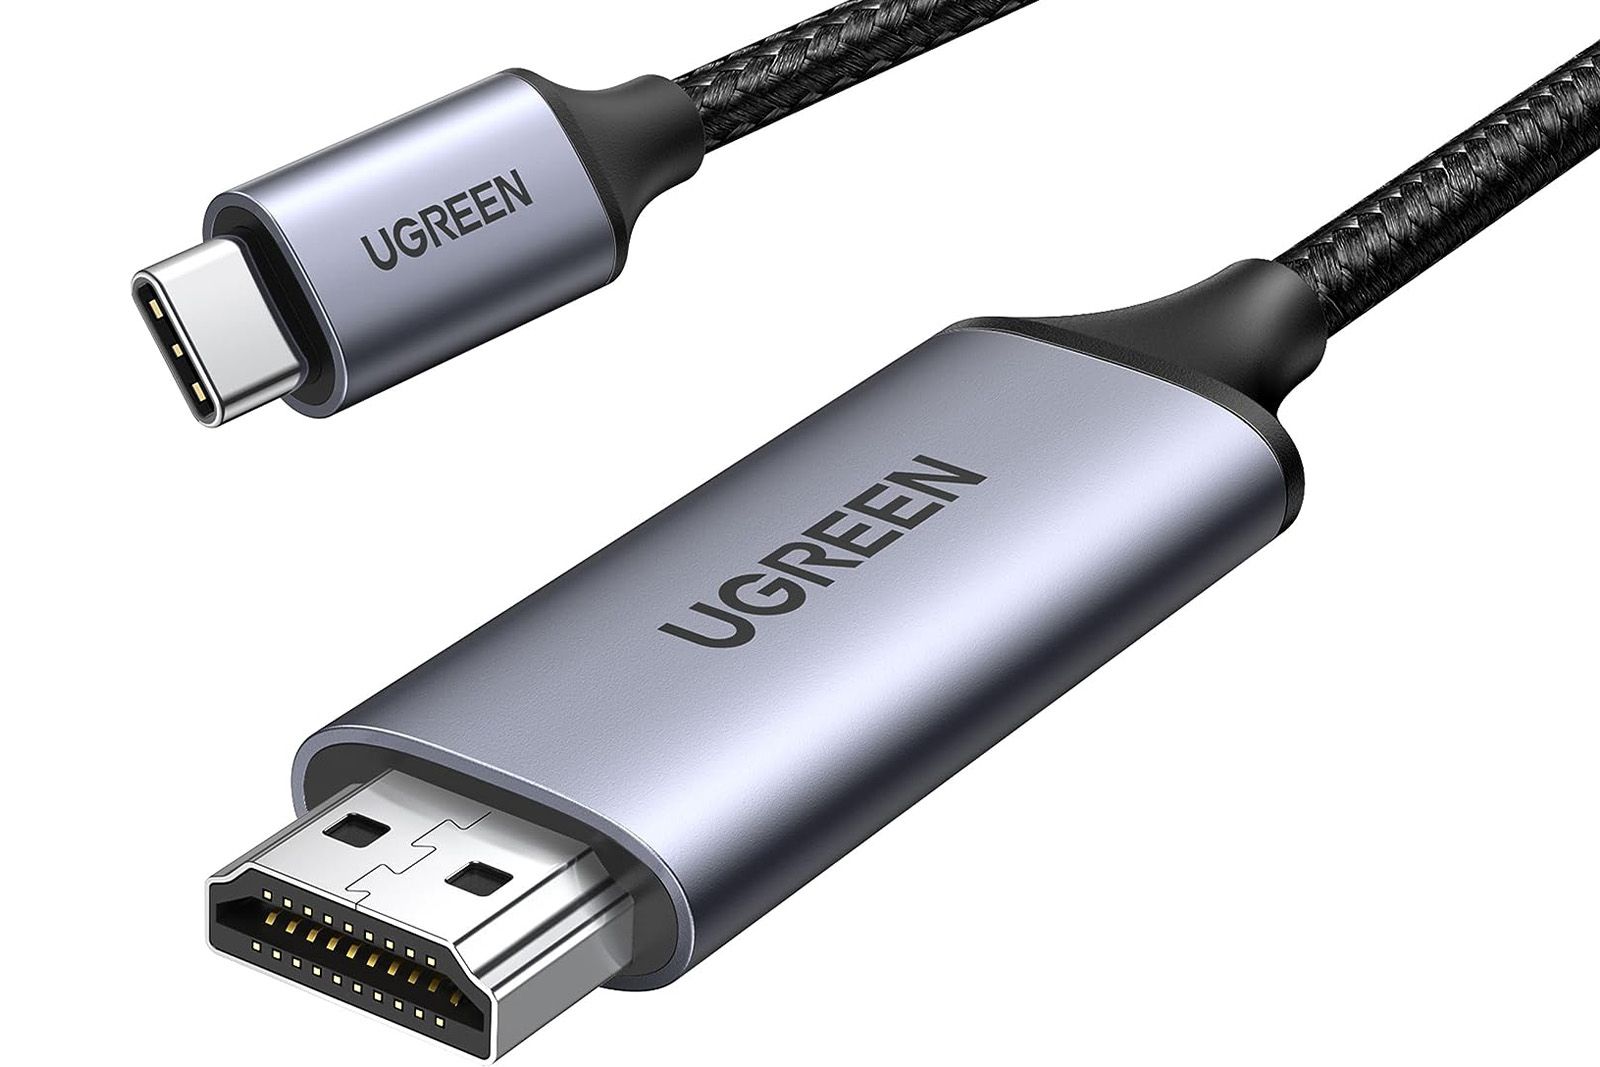 UGREEN USB C to HDMI Cable